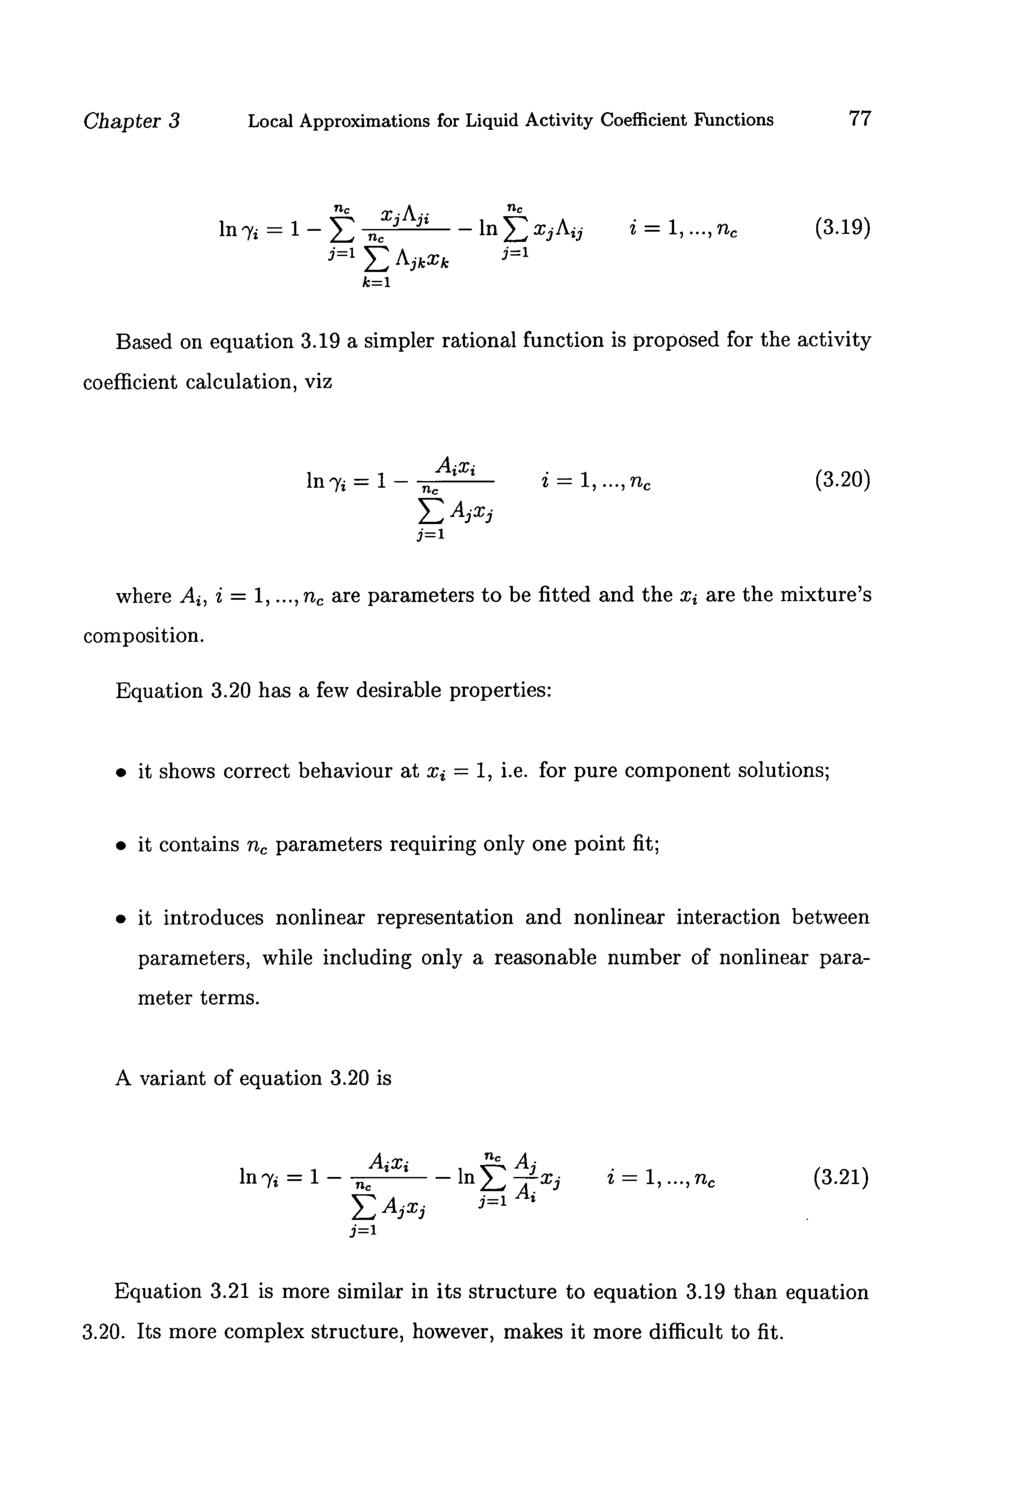 Chapter 3 Local Approximations for Liquid Activity Coefficient Functions 77 nc in'y = 1 - In E x j A ij i = 1,...,n (3.19) j=1 E A3kxk j=1 k=1 Based on equation 3.